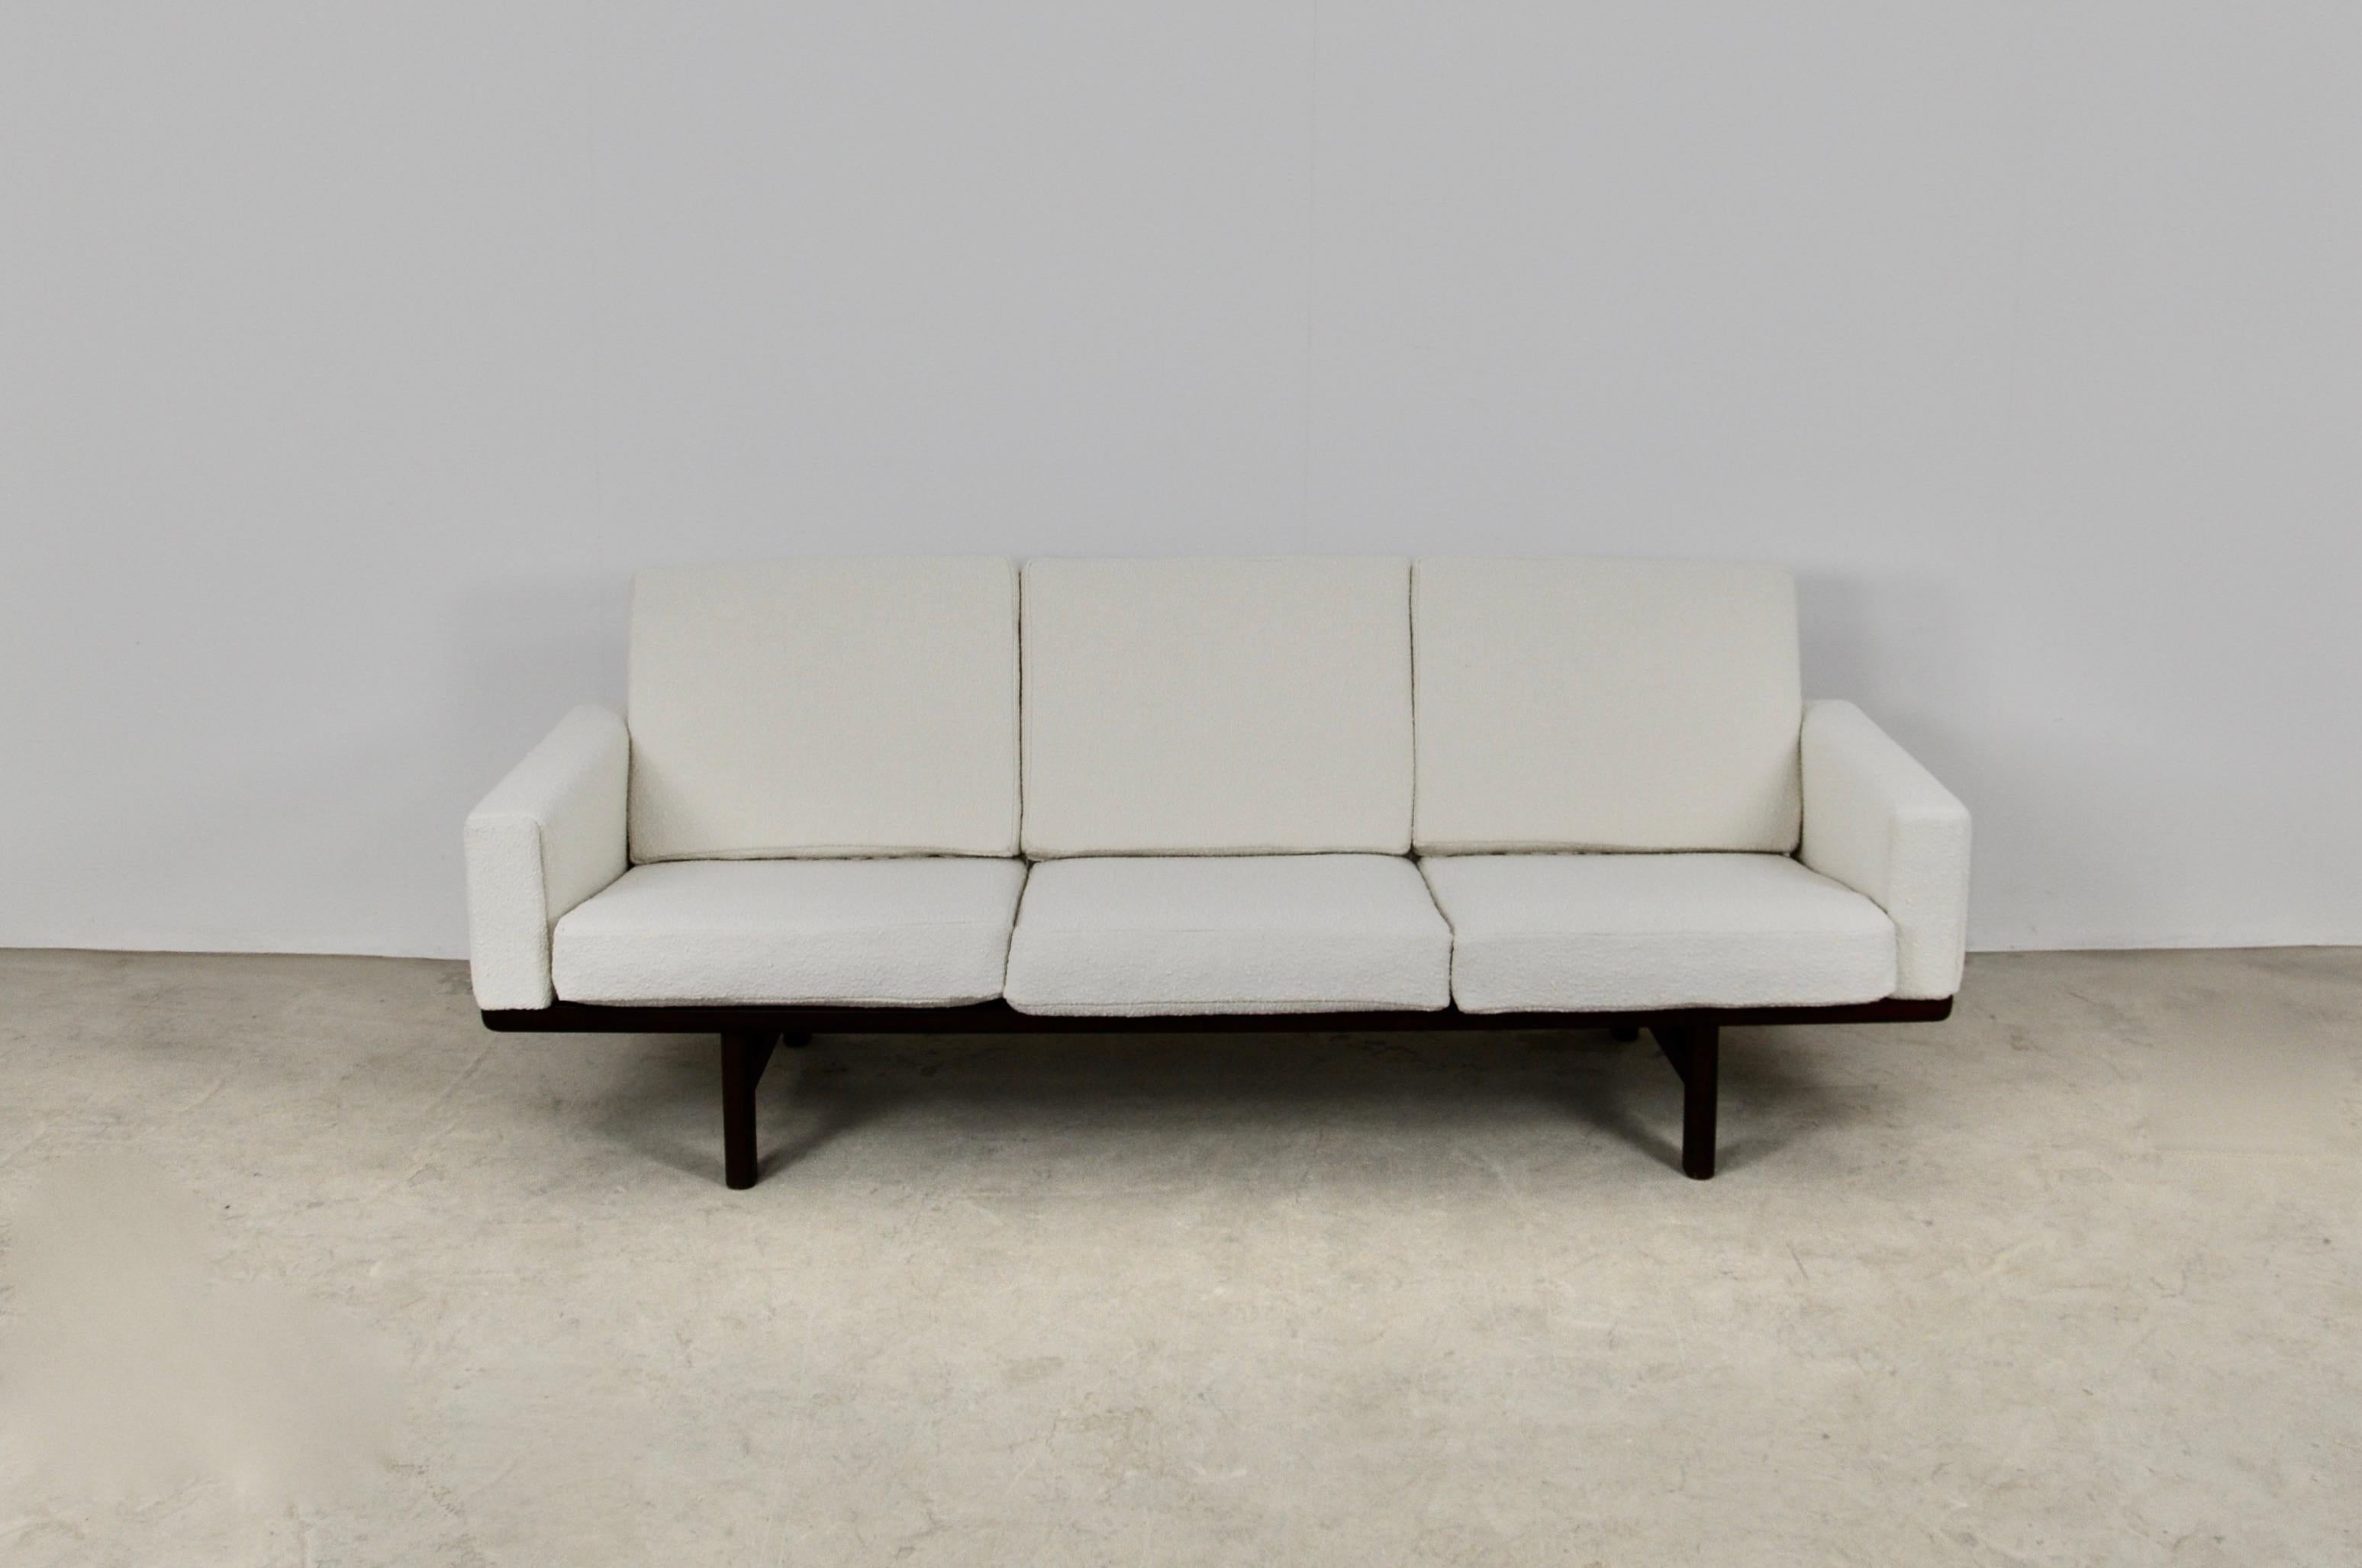 Sofa 3 places in wood and fabric, wear due to time and the age of the sofa. Measure: Seat height 42cm.